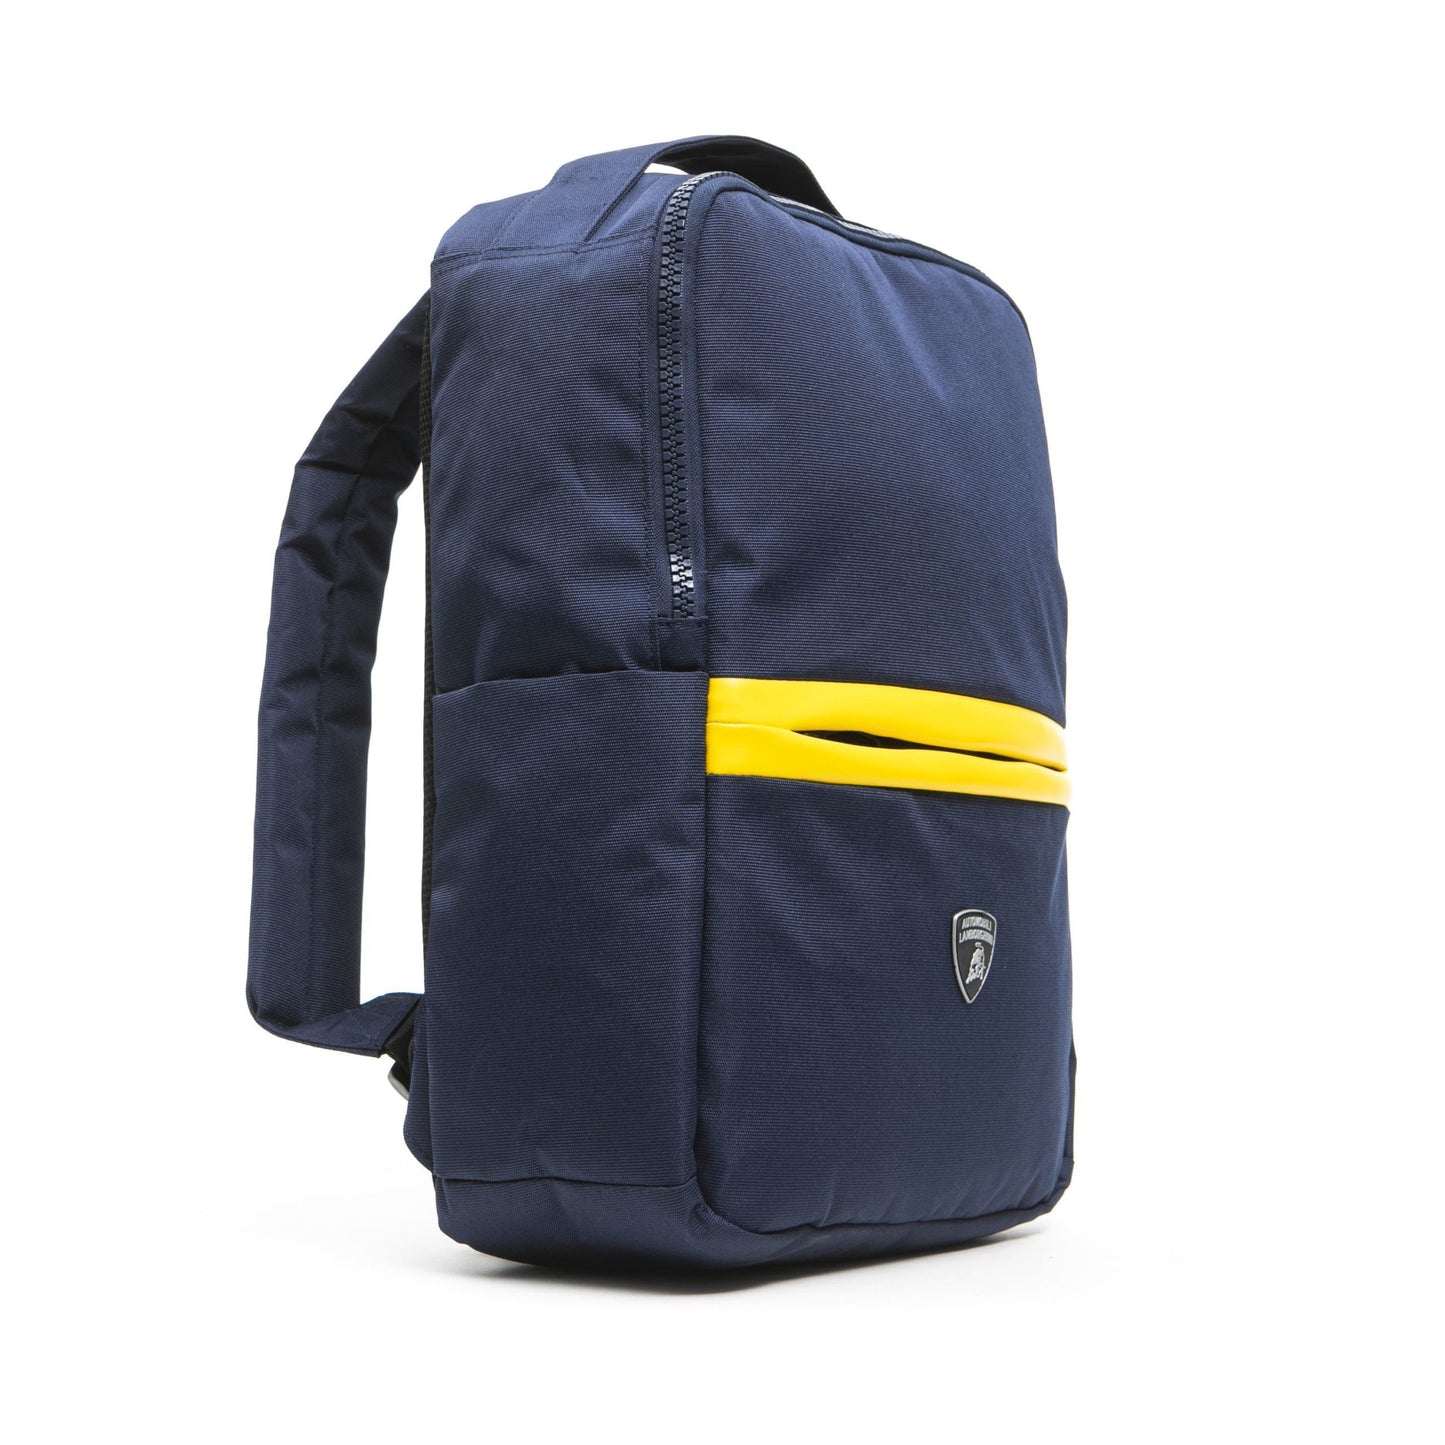 Sleek Blue Backpack with Durable Straps